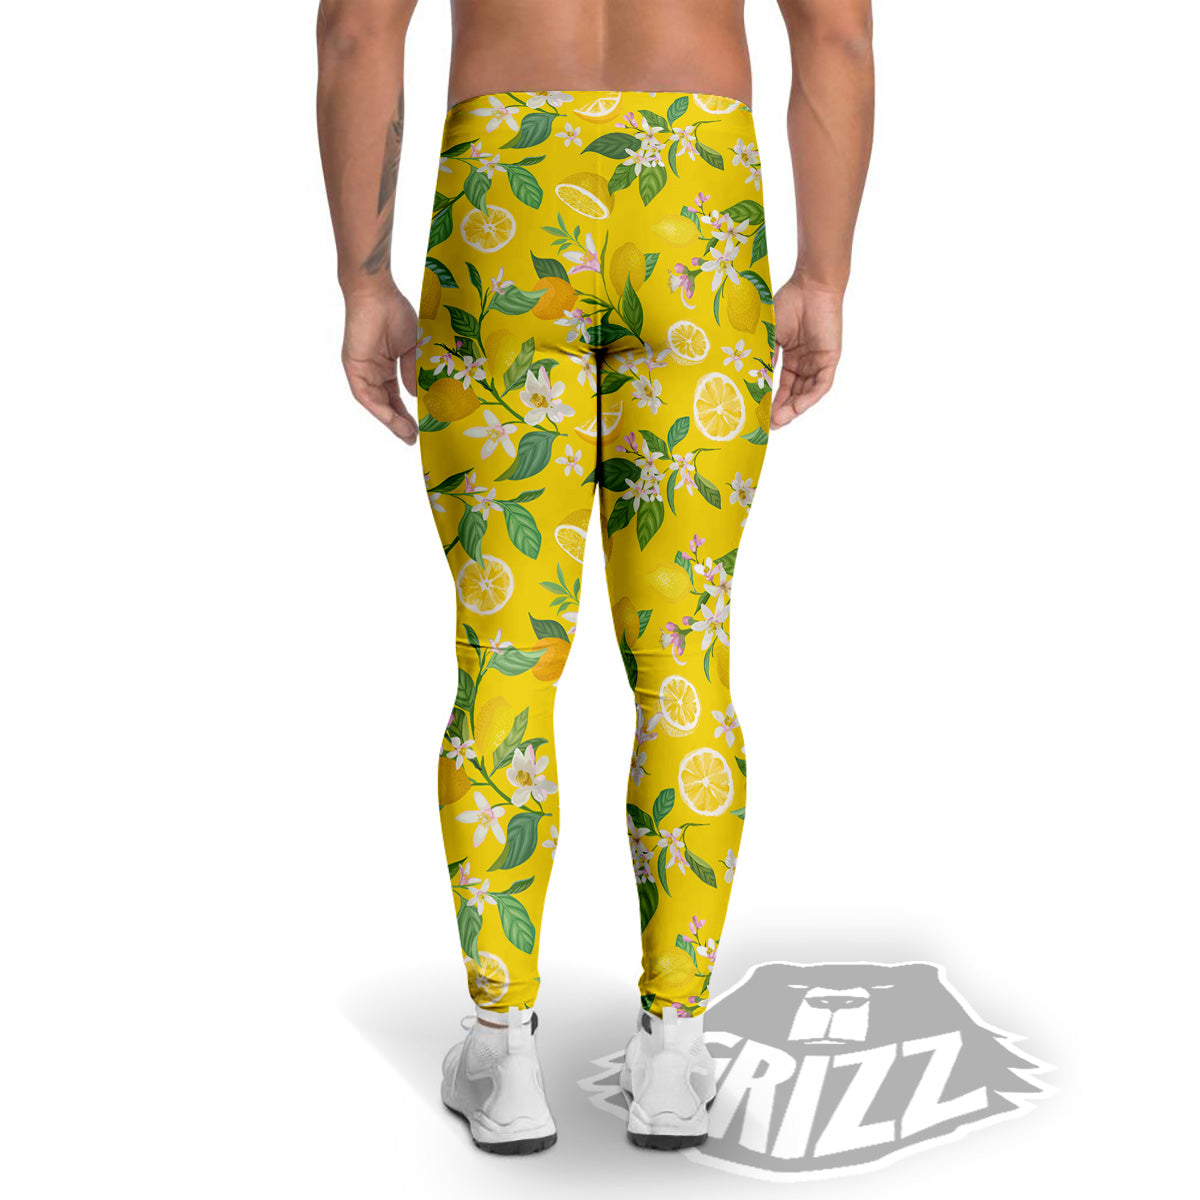 Wild Lemon Leggings : Beautiful #Yoga Pants - #Exercise Leggings and  #Running Tights - Health and Training … | Yellow leggings, Fashion outfits,  Outfit inspirations